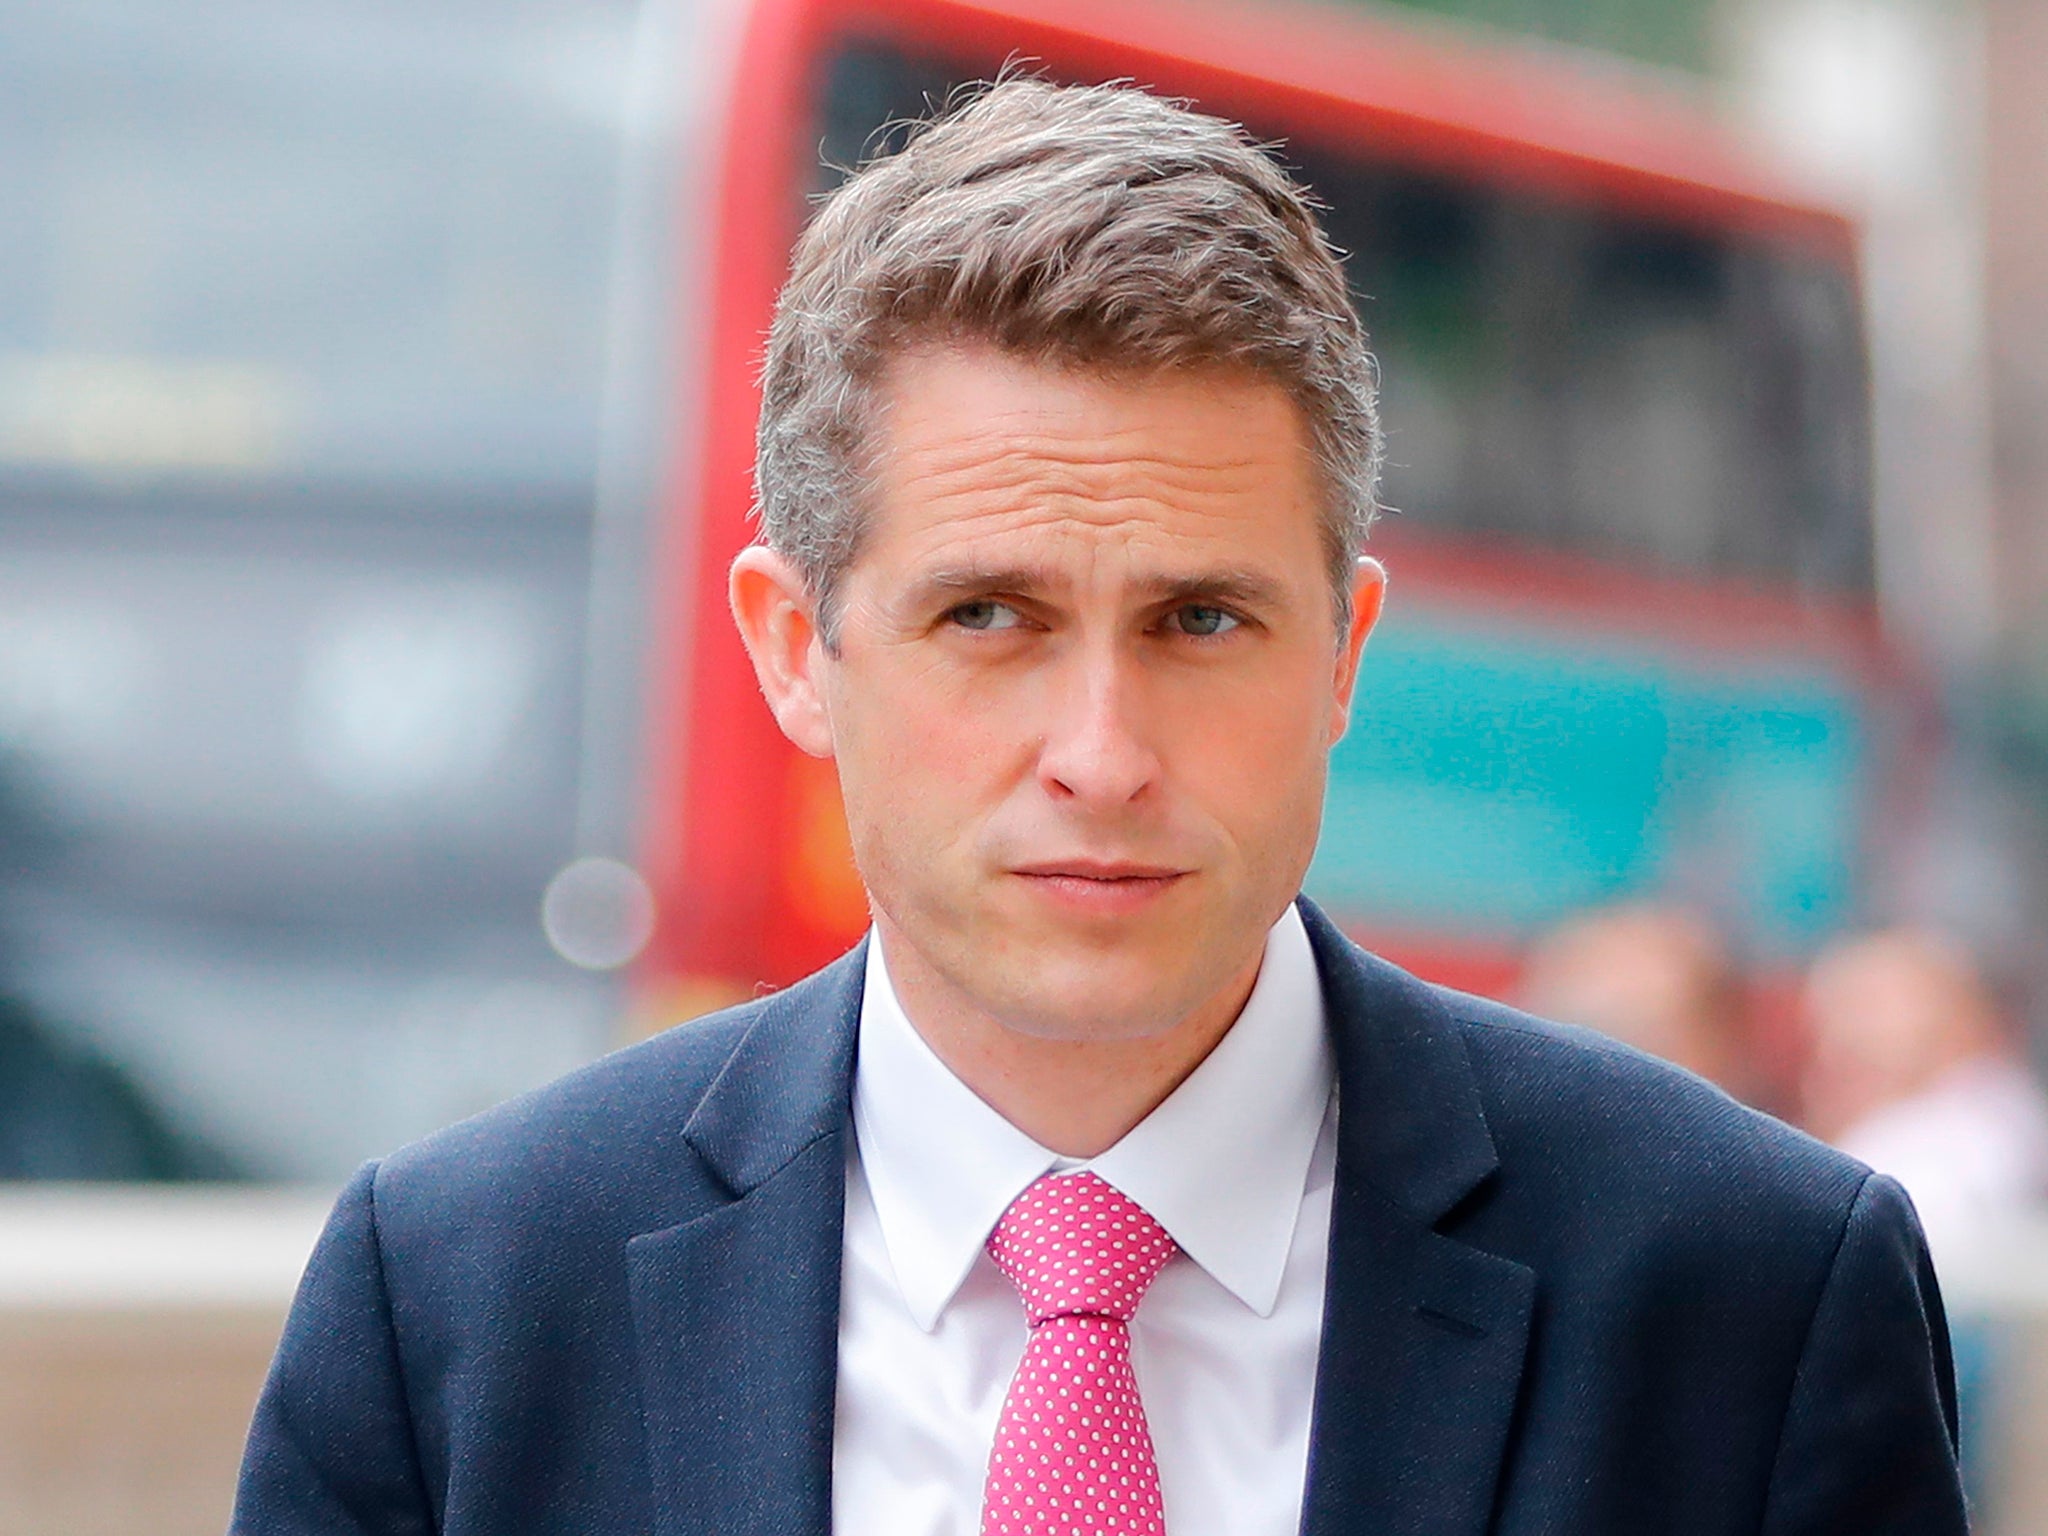 Defence Secretary Gavin Williamson said he was 'prepared to go to any lengths to stop this ridiculous vendetta against former service personnel.'